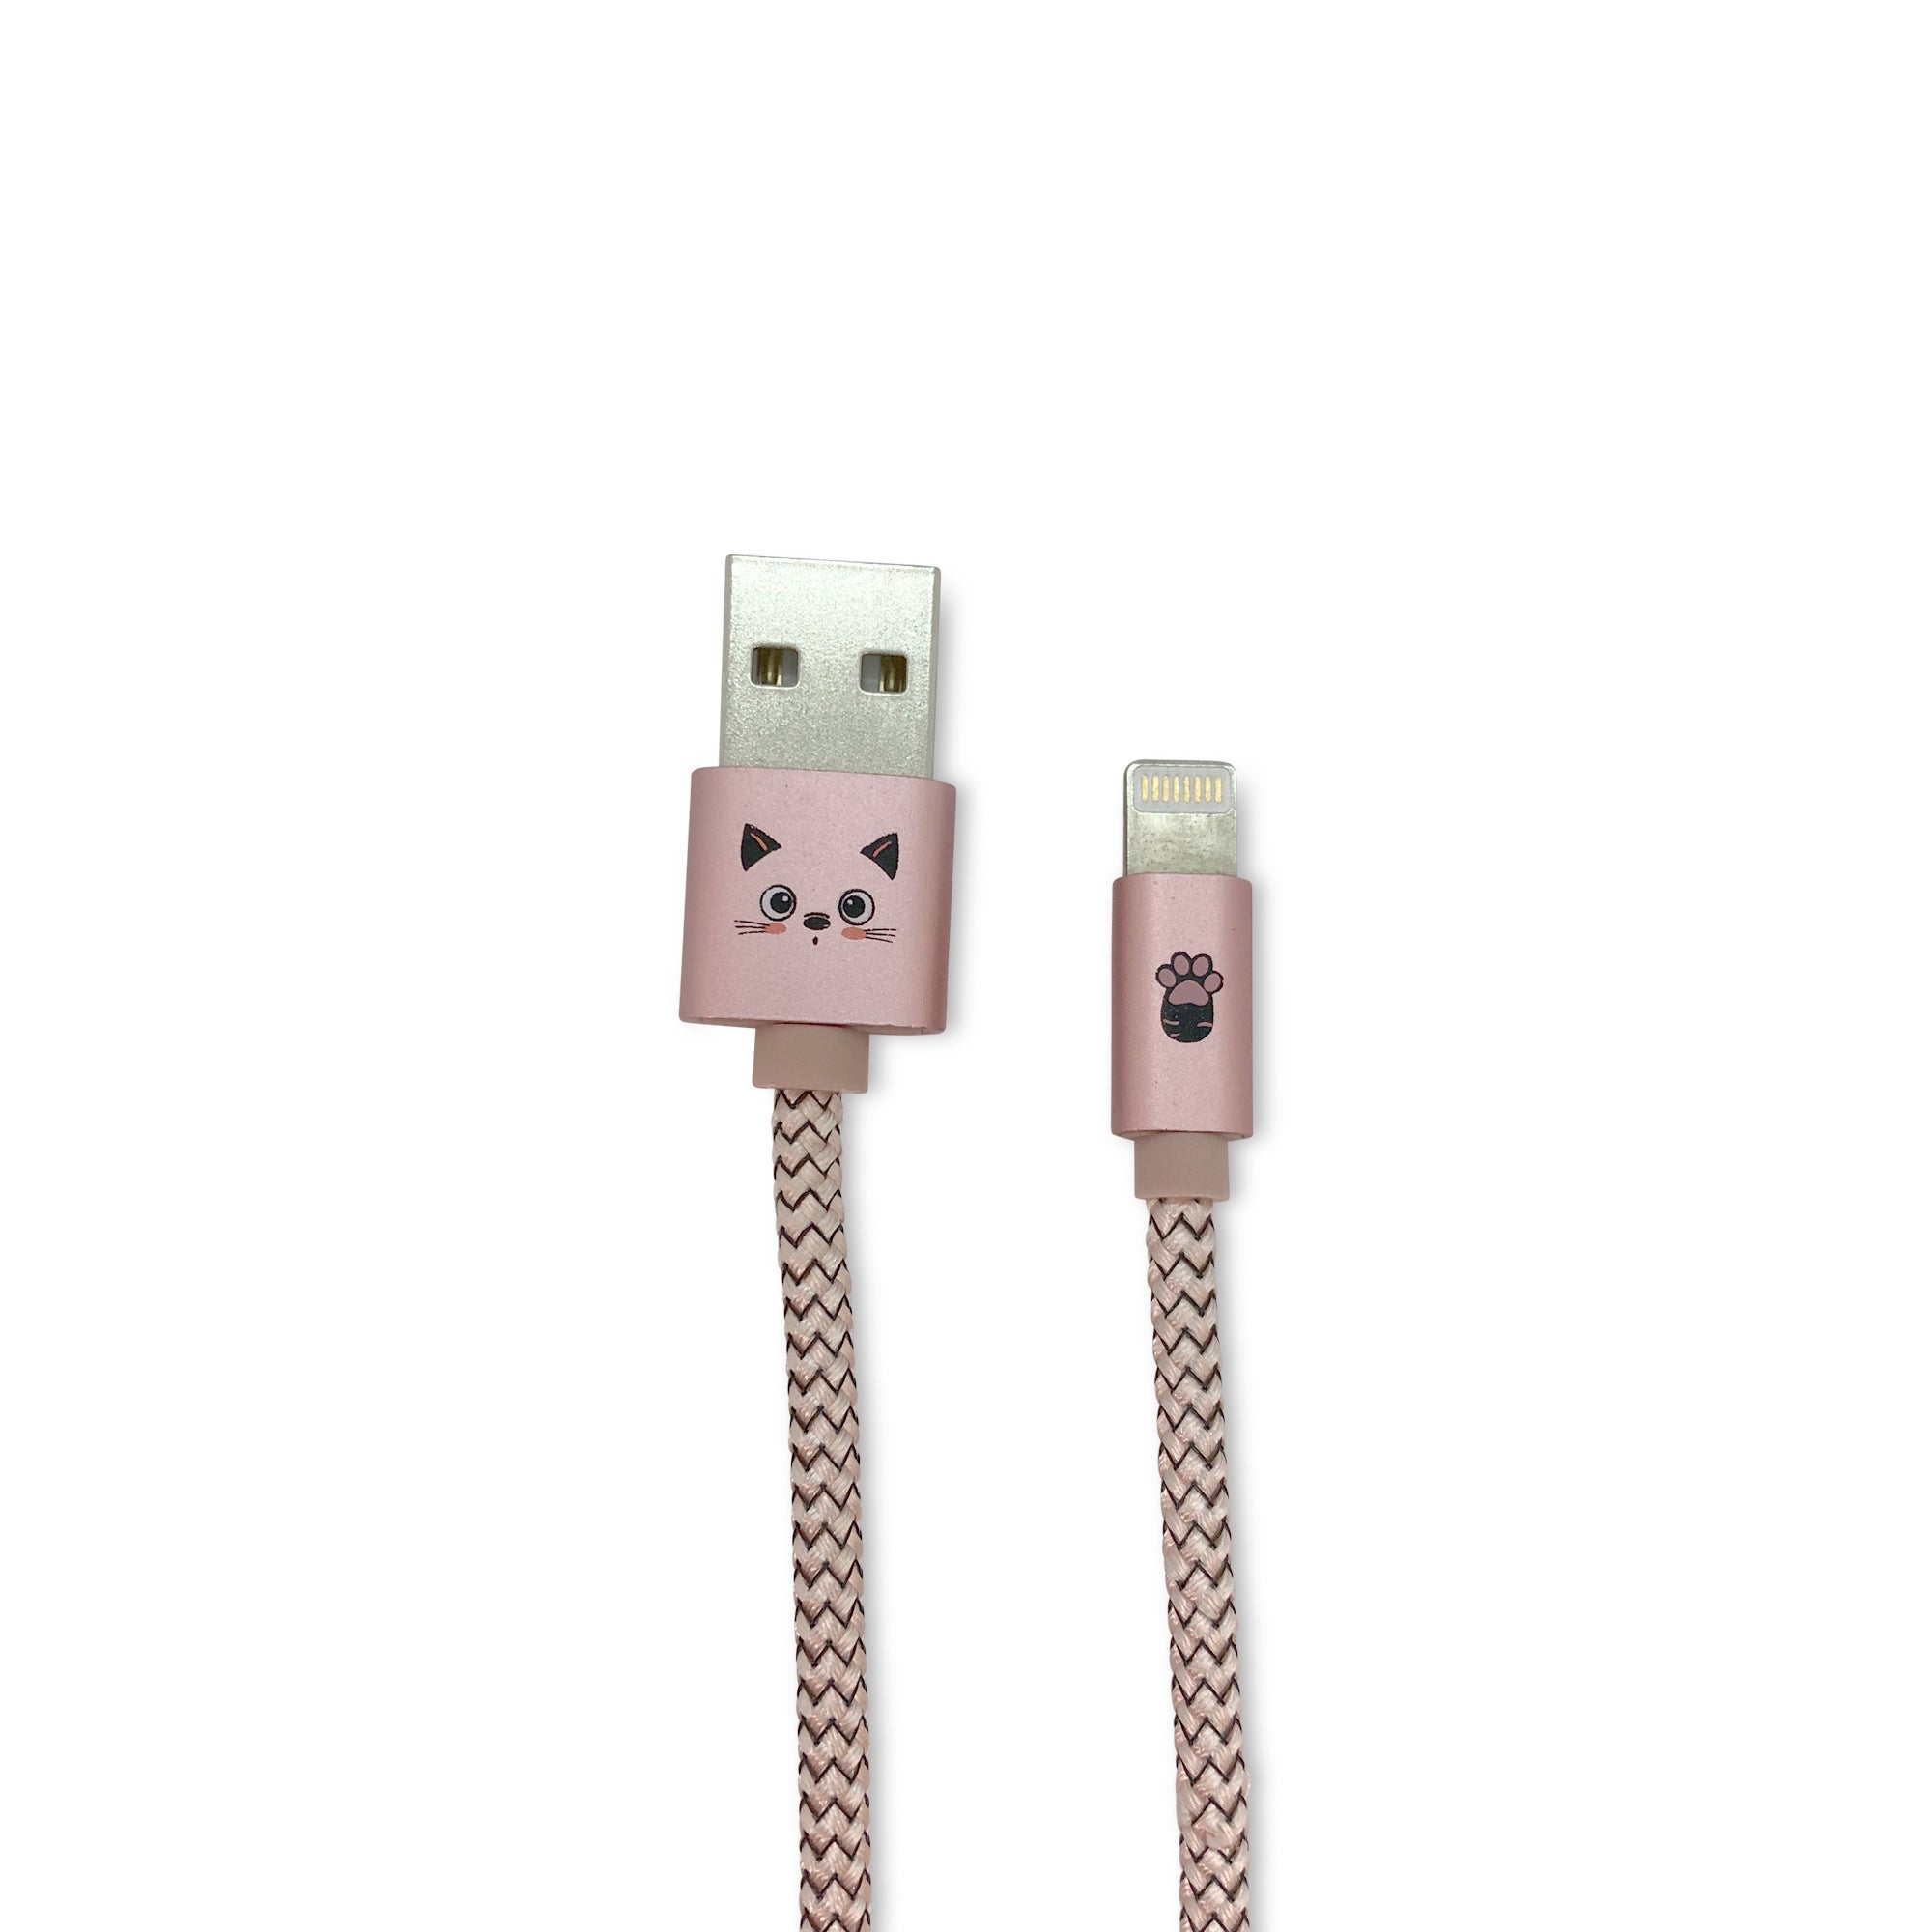 Lightning Cable, Nylon Braided Long Cord Fast Charging USB Sync Charger Cables Charging Cord for iPhone and iPad - Cute Cat and Dog Design (3 Feet/0.9 Meter) 01